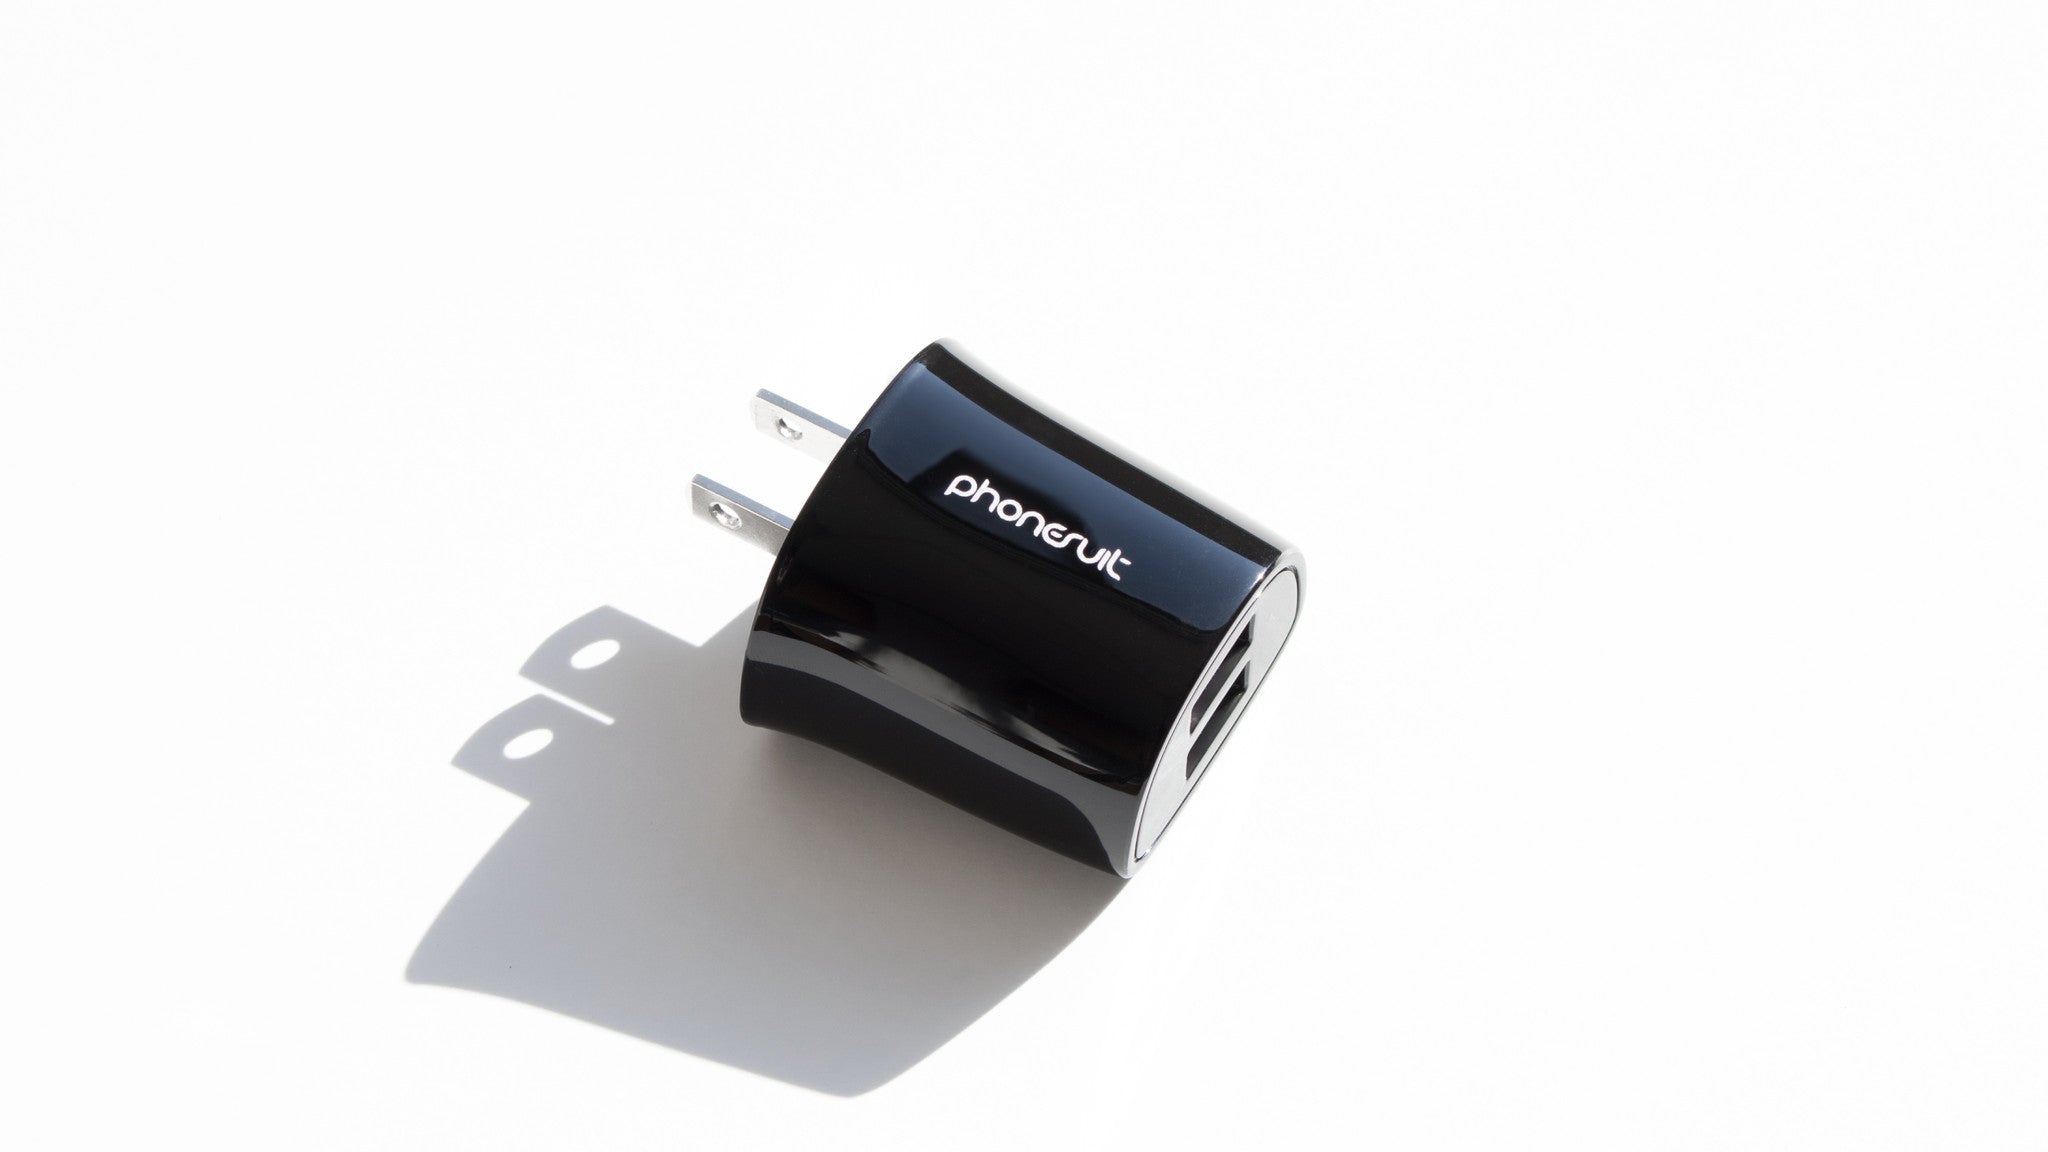 Hyper Dual USB Wall Charger for iPhone, Samsung & More